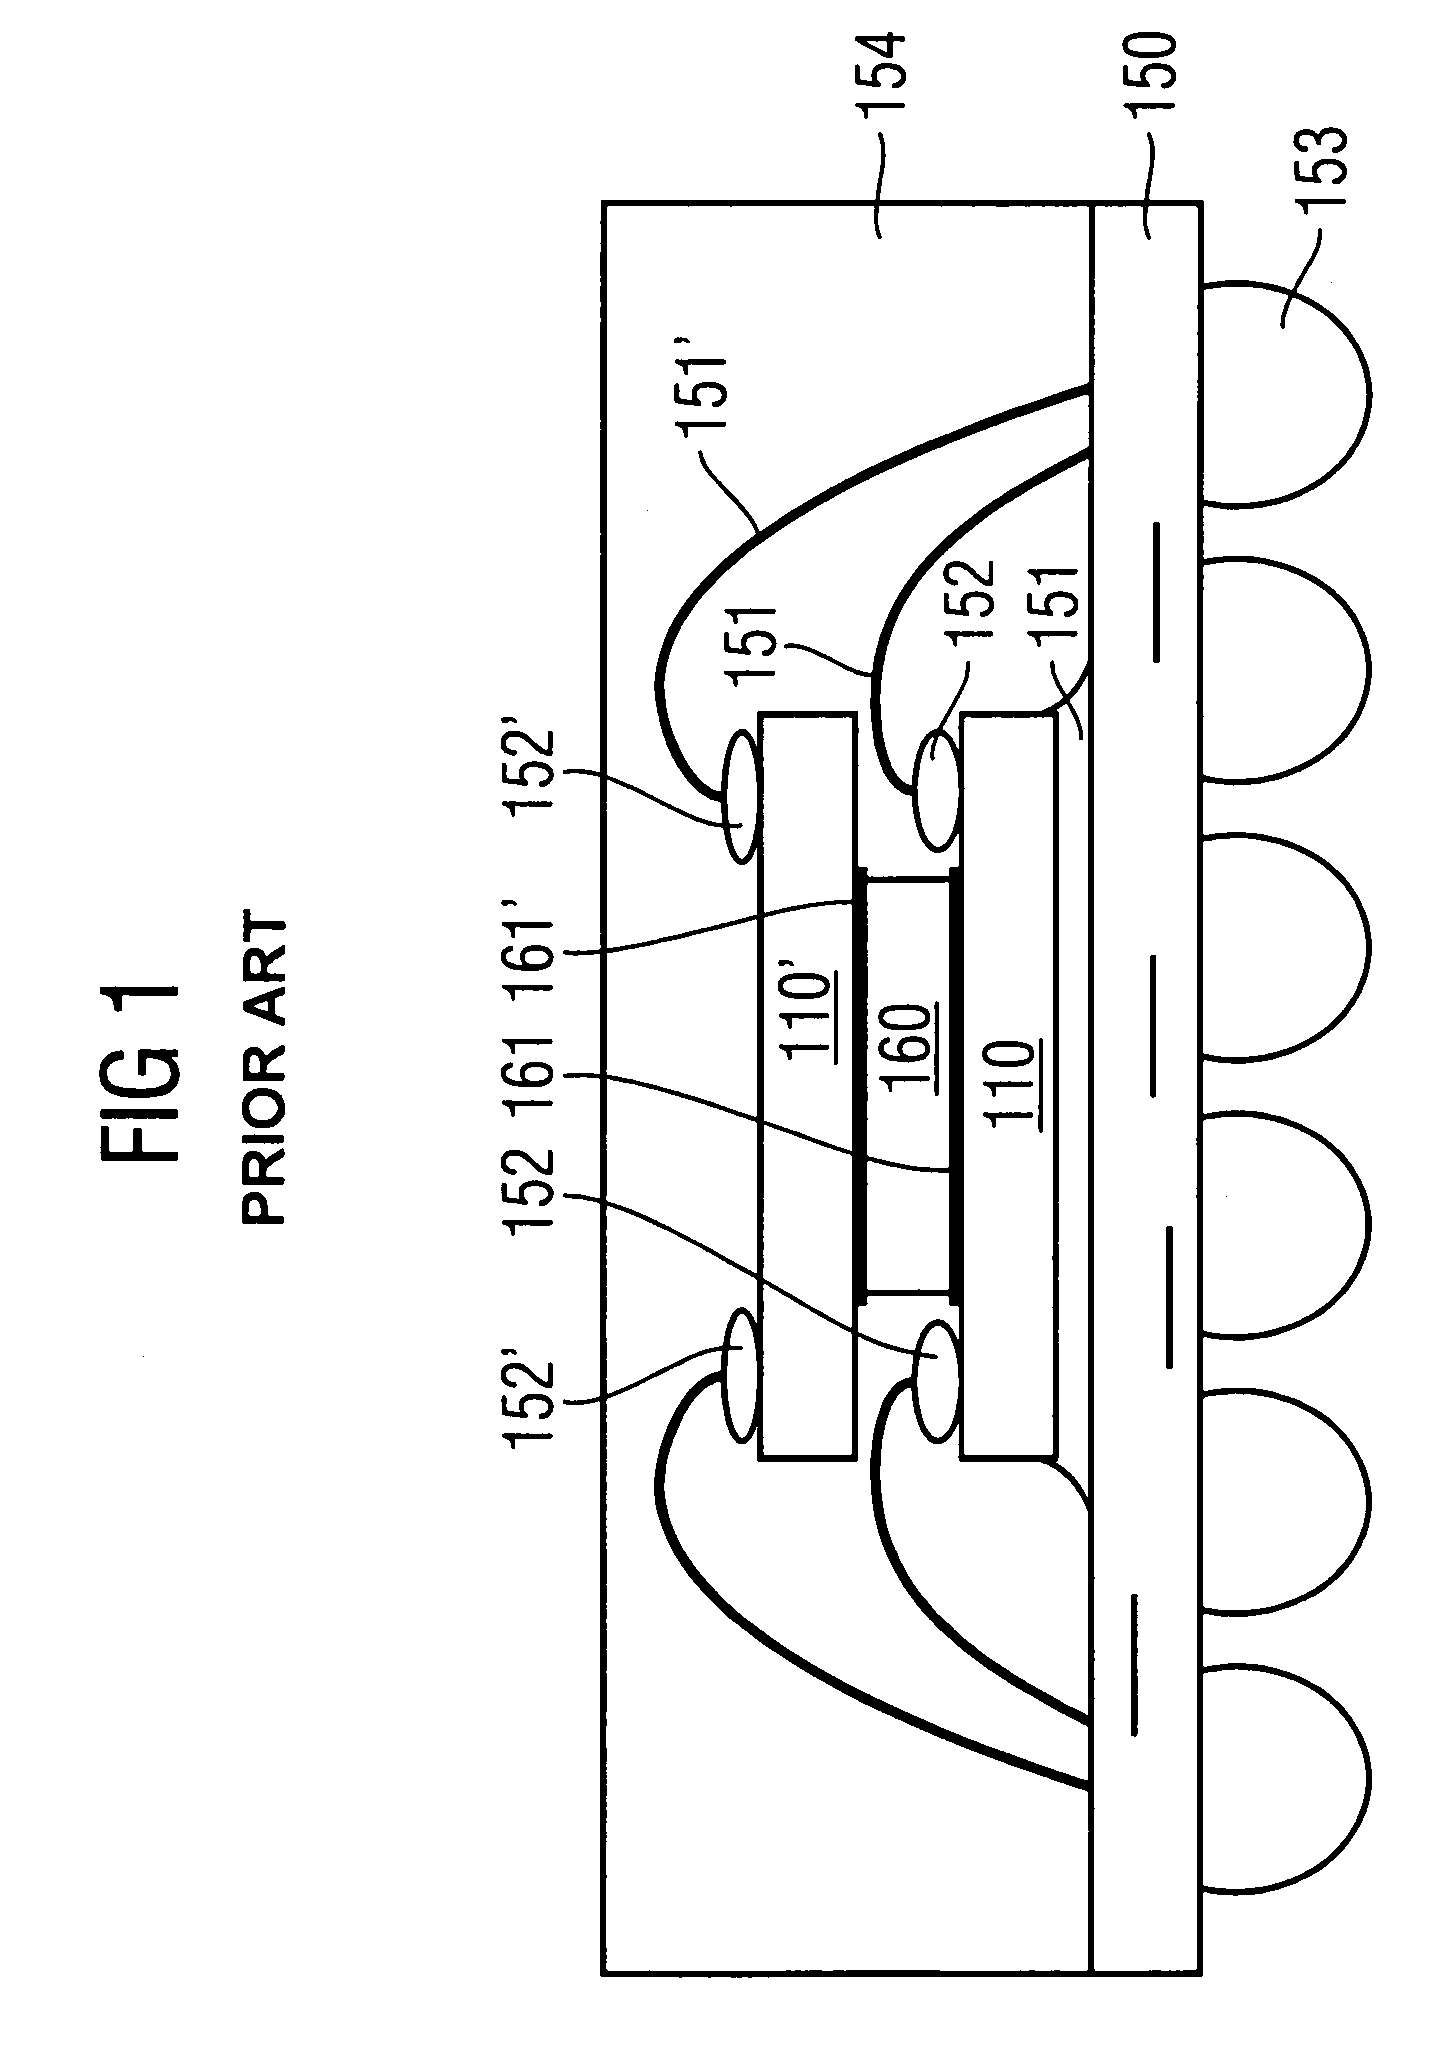 Method of manufacturing a semiconductor device comprising stacked chips and a corresponding semiconductor device